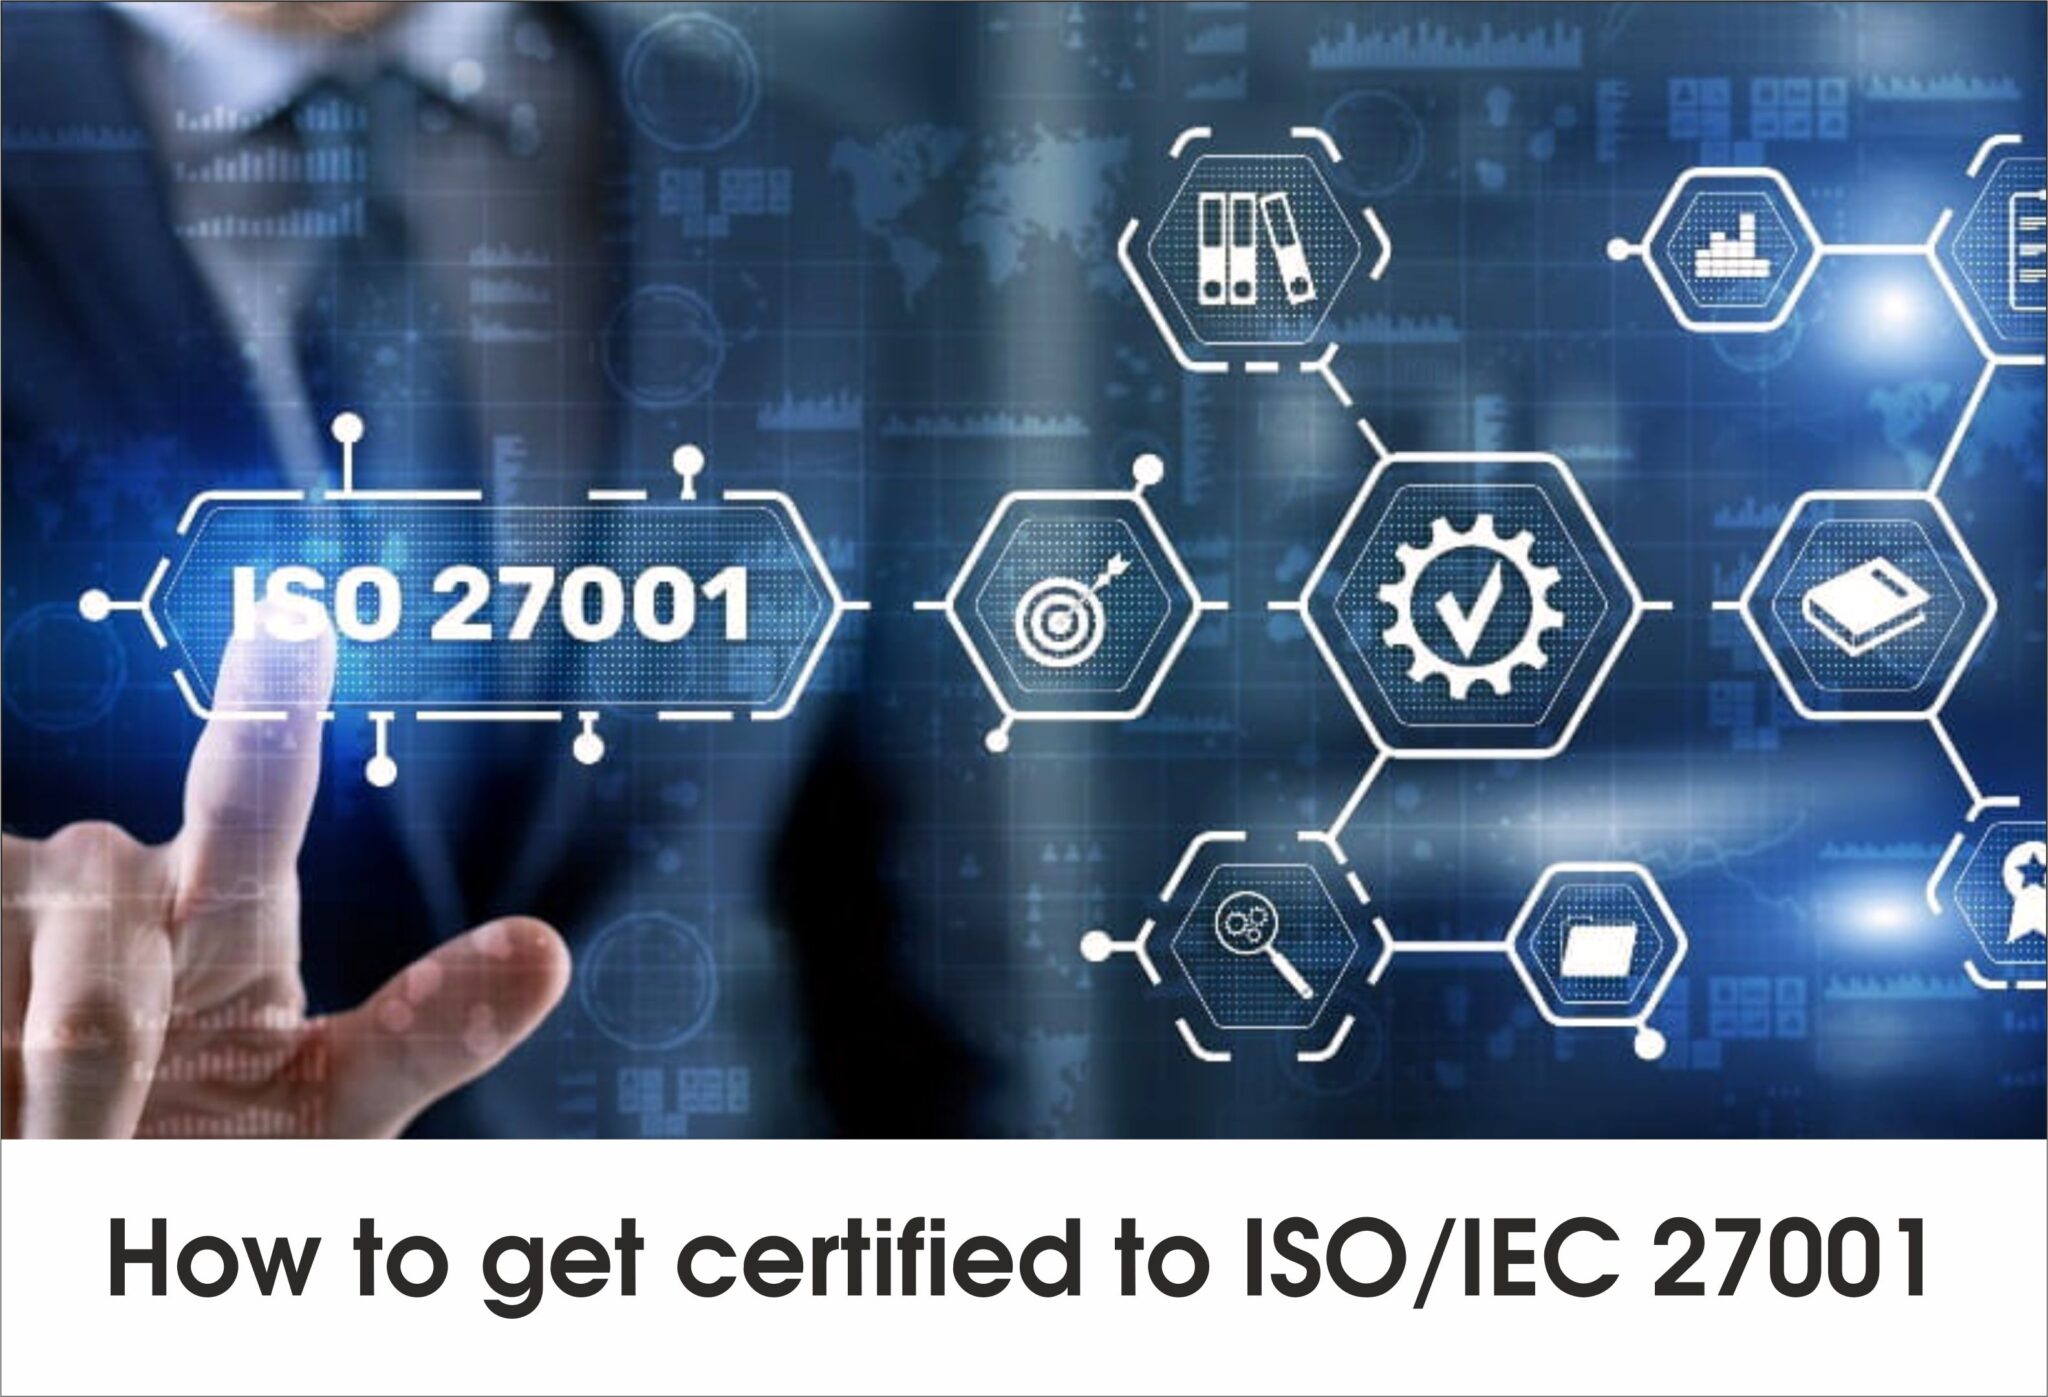 How to get certified to ISO/IEC 27001